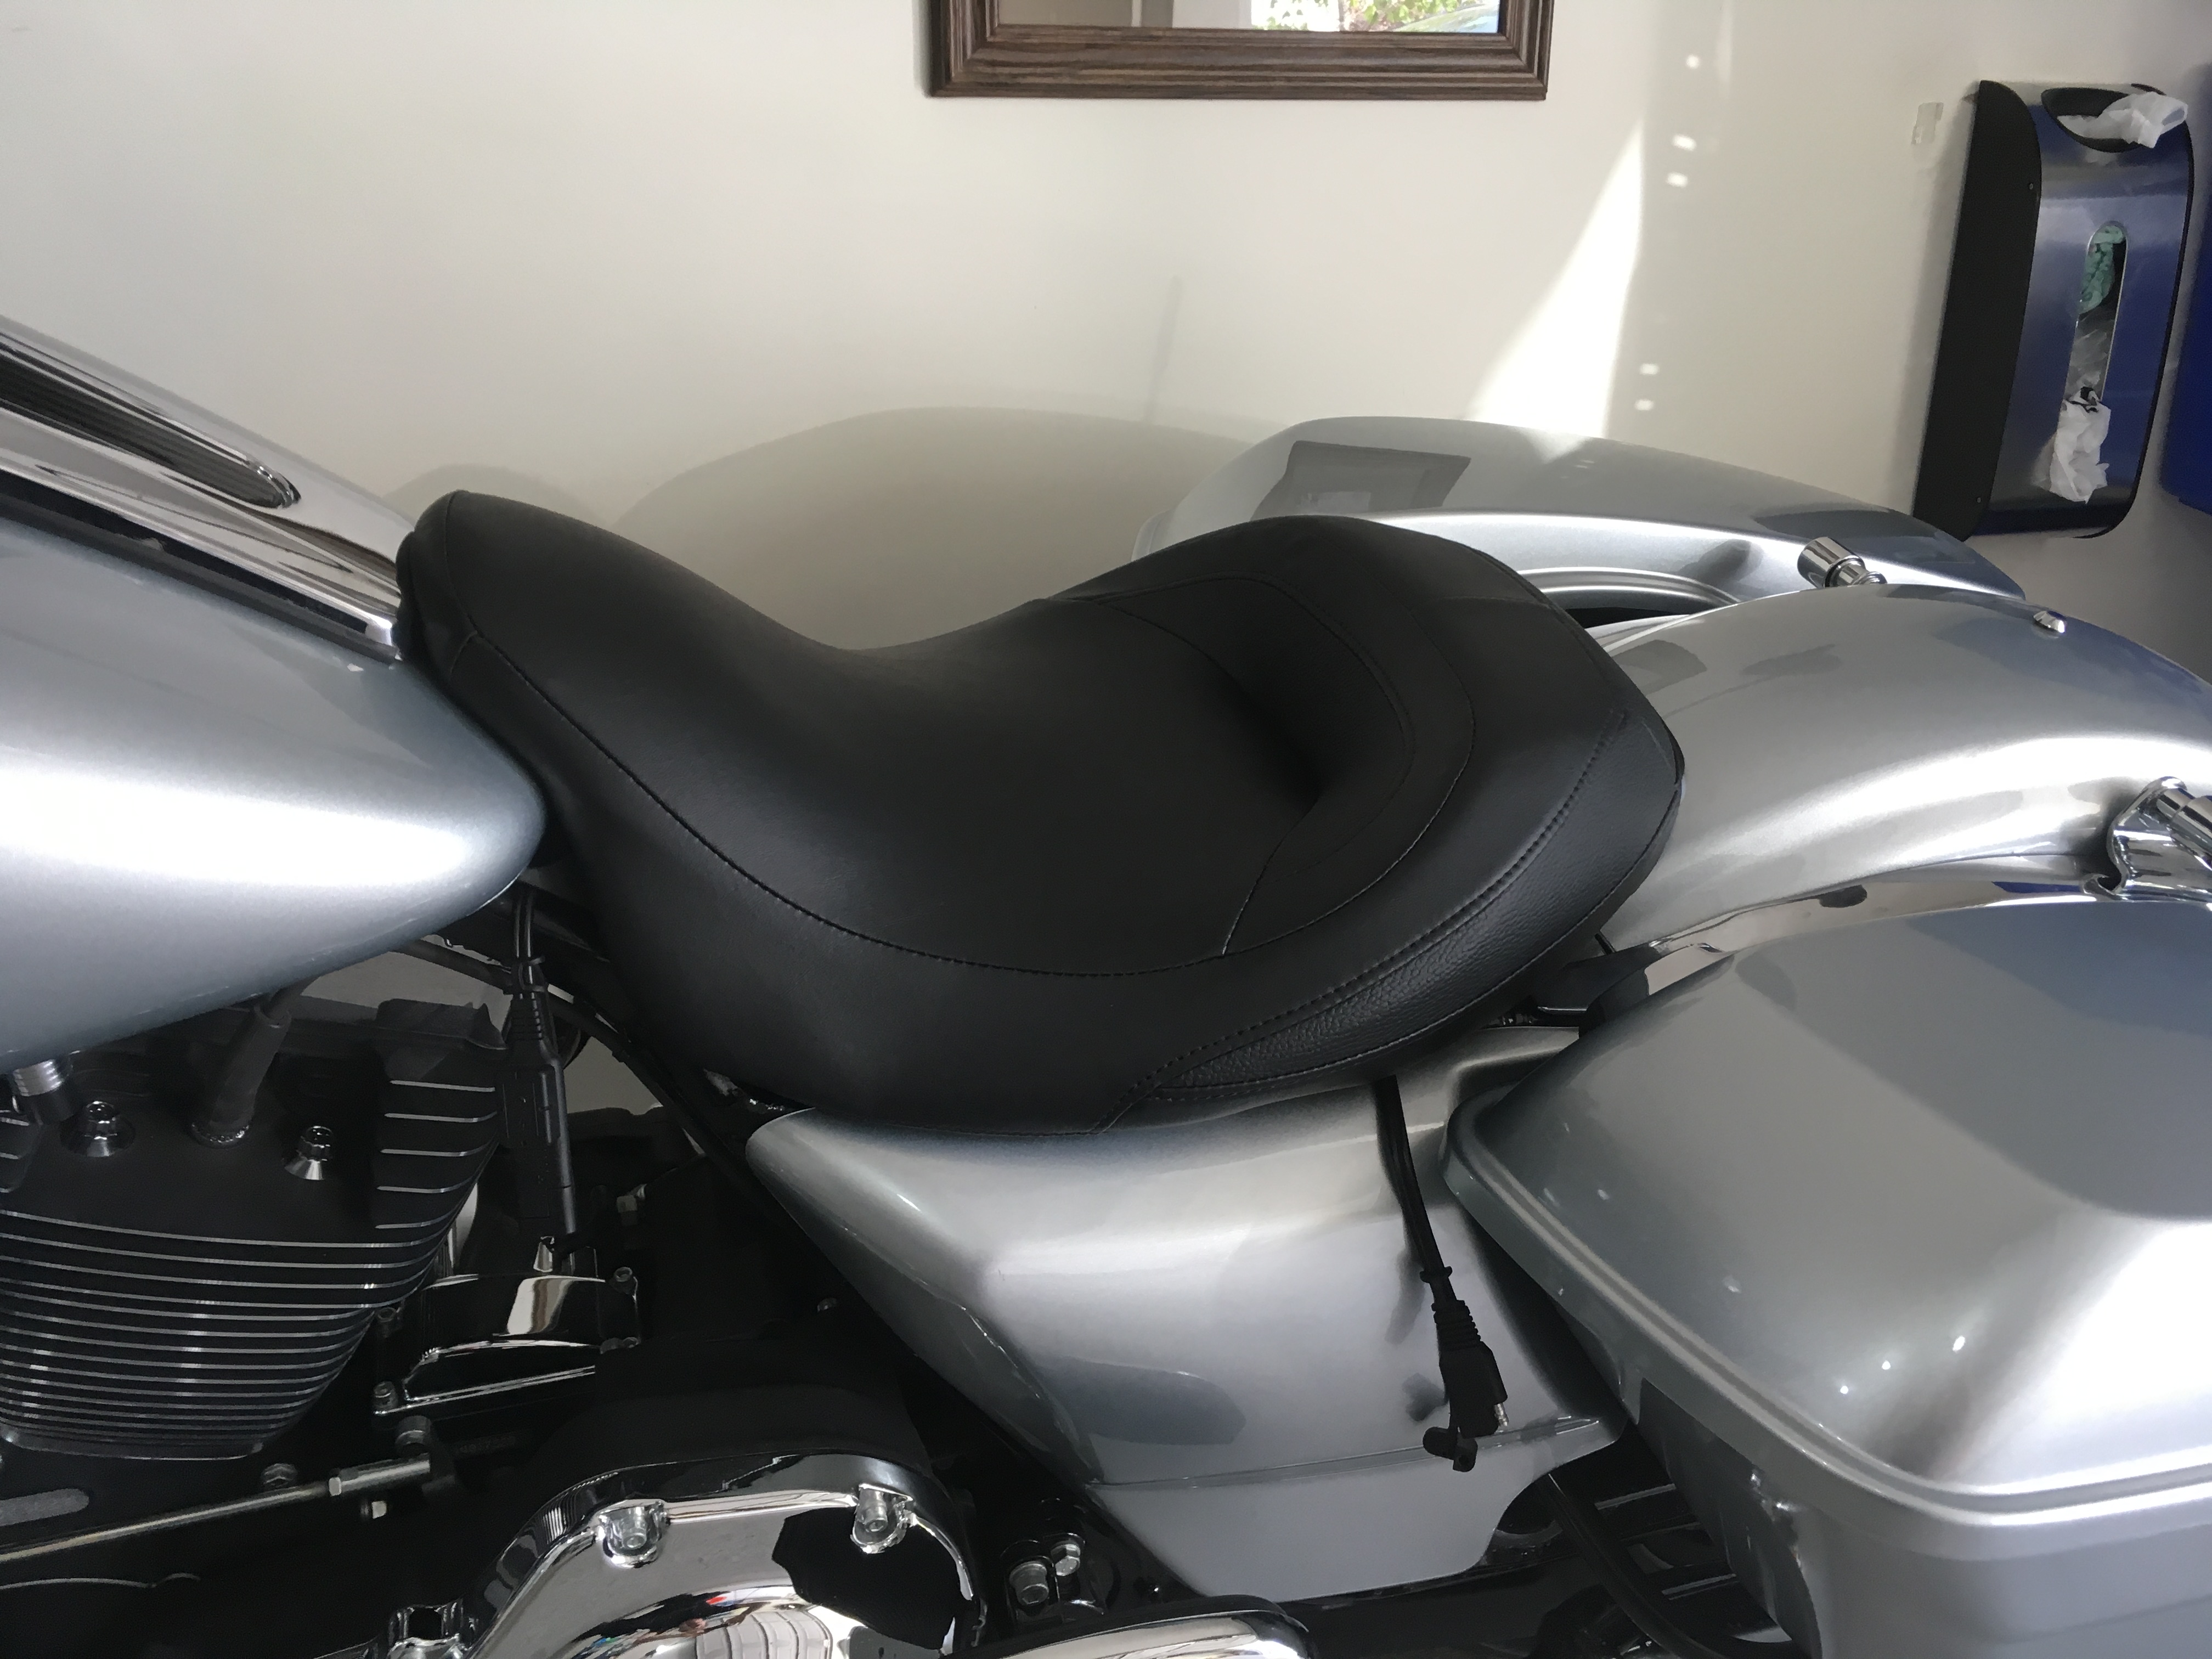 My .002 cents on Harley's 52000249 low Profile seat ...